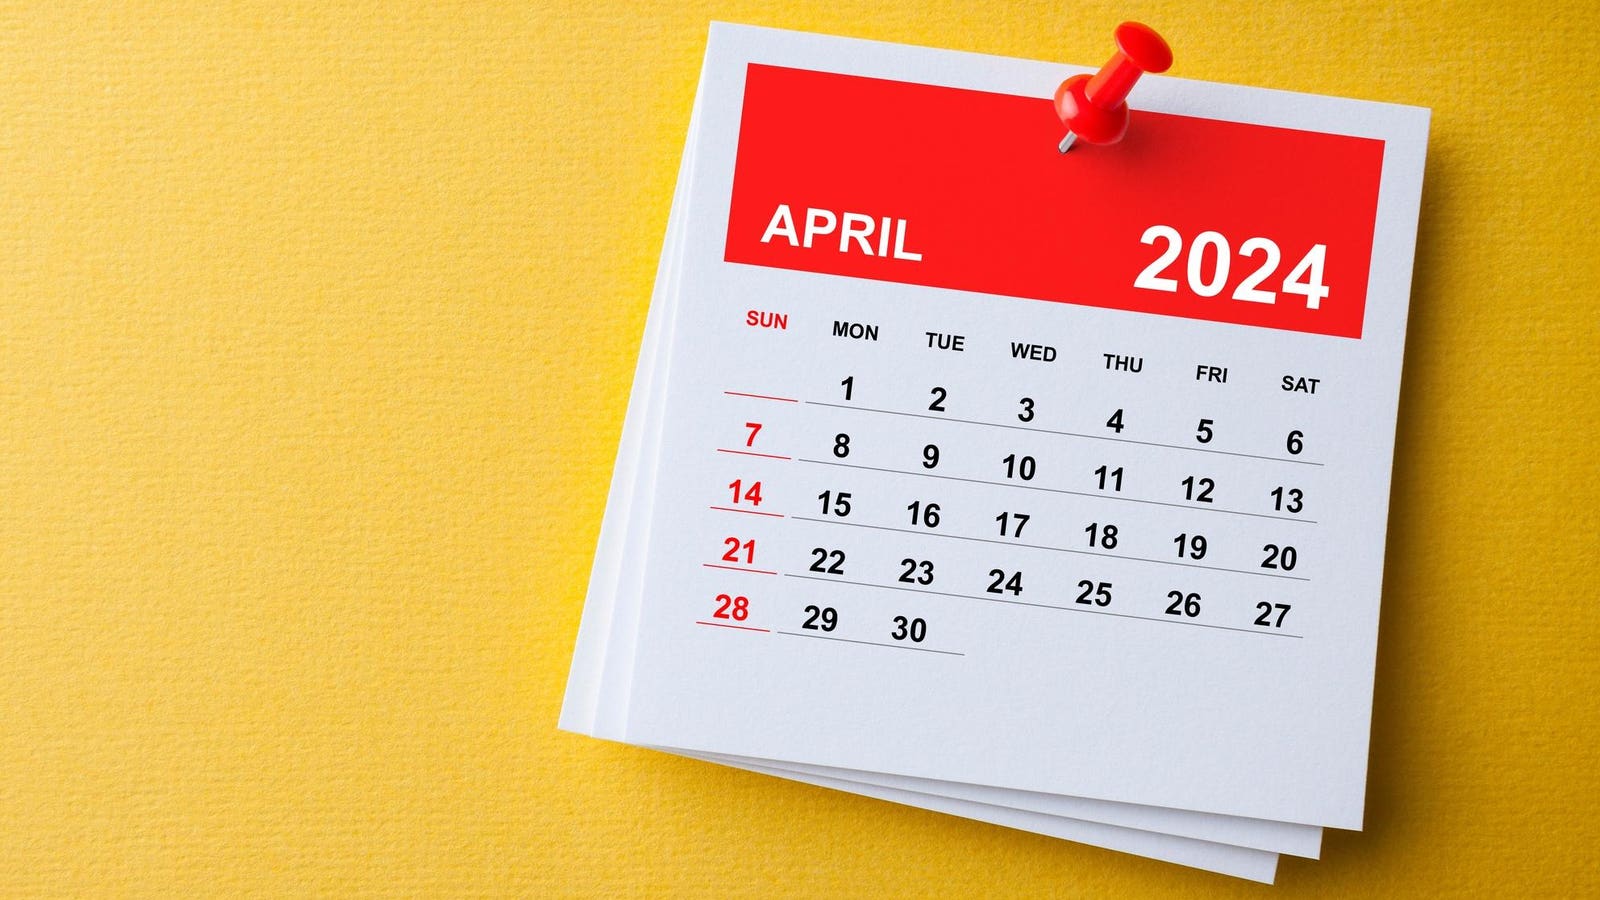 Vacation Days In April 2024